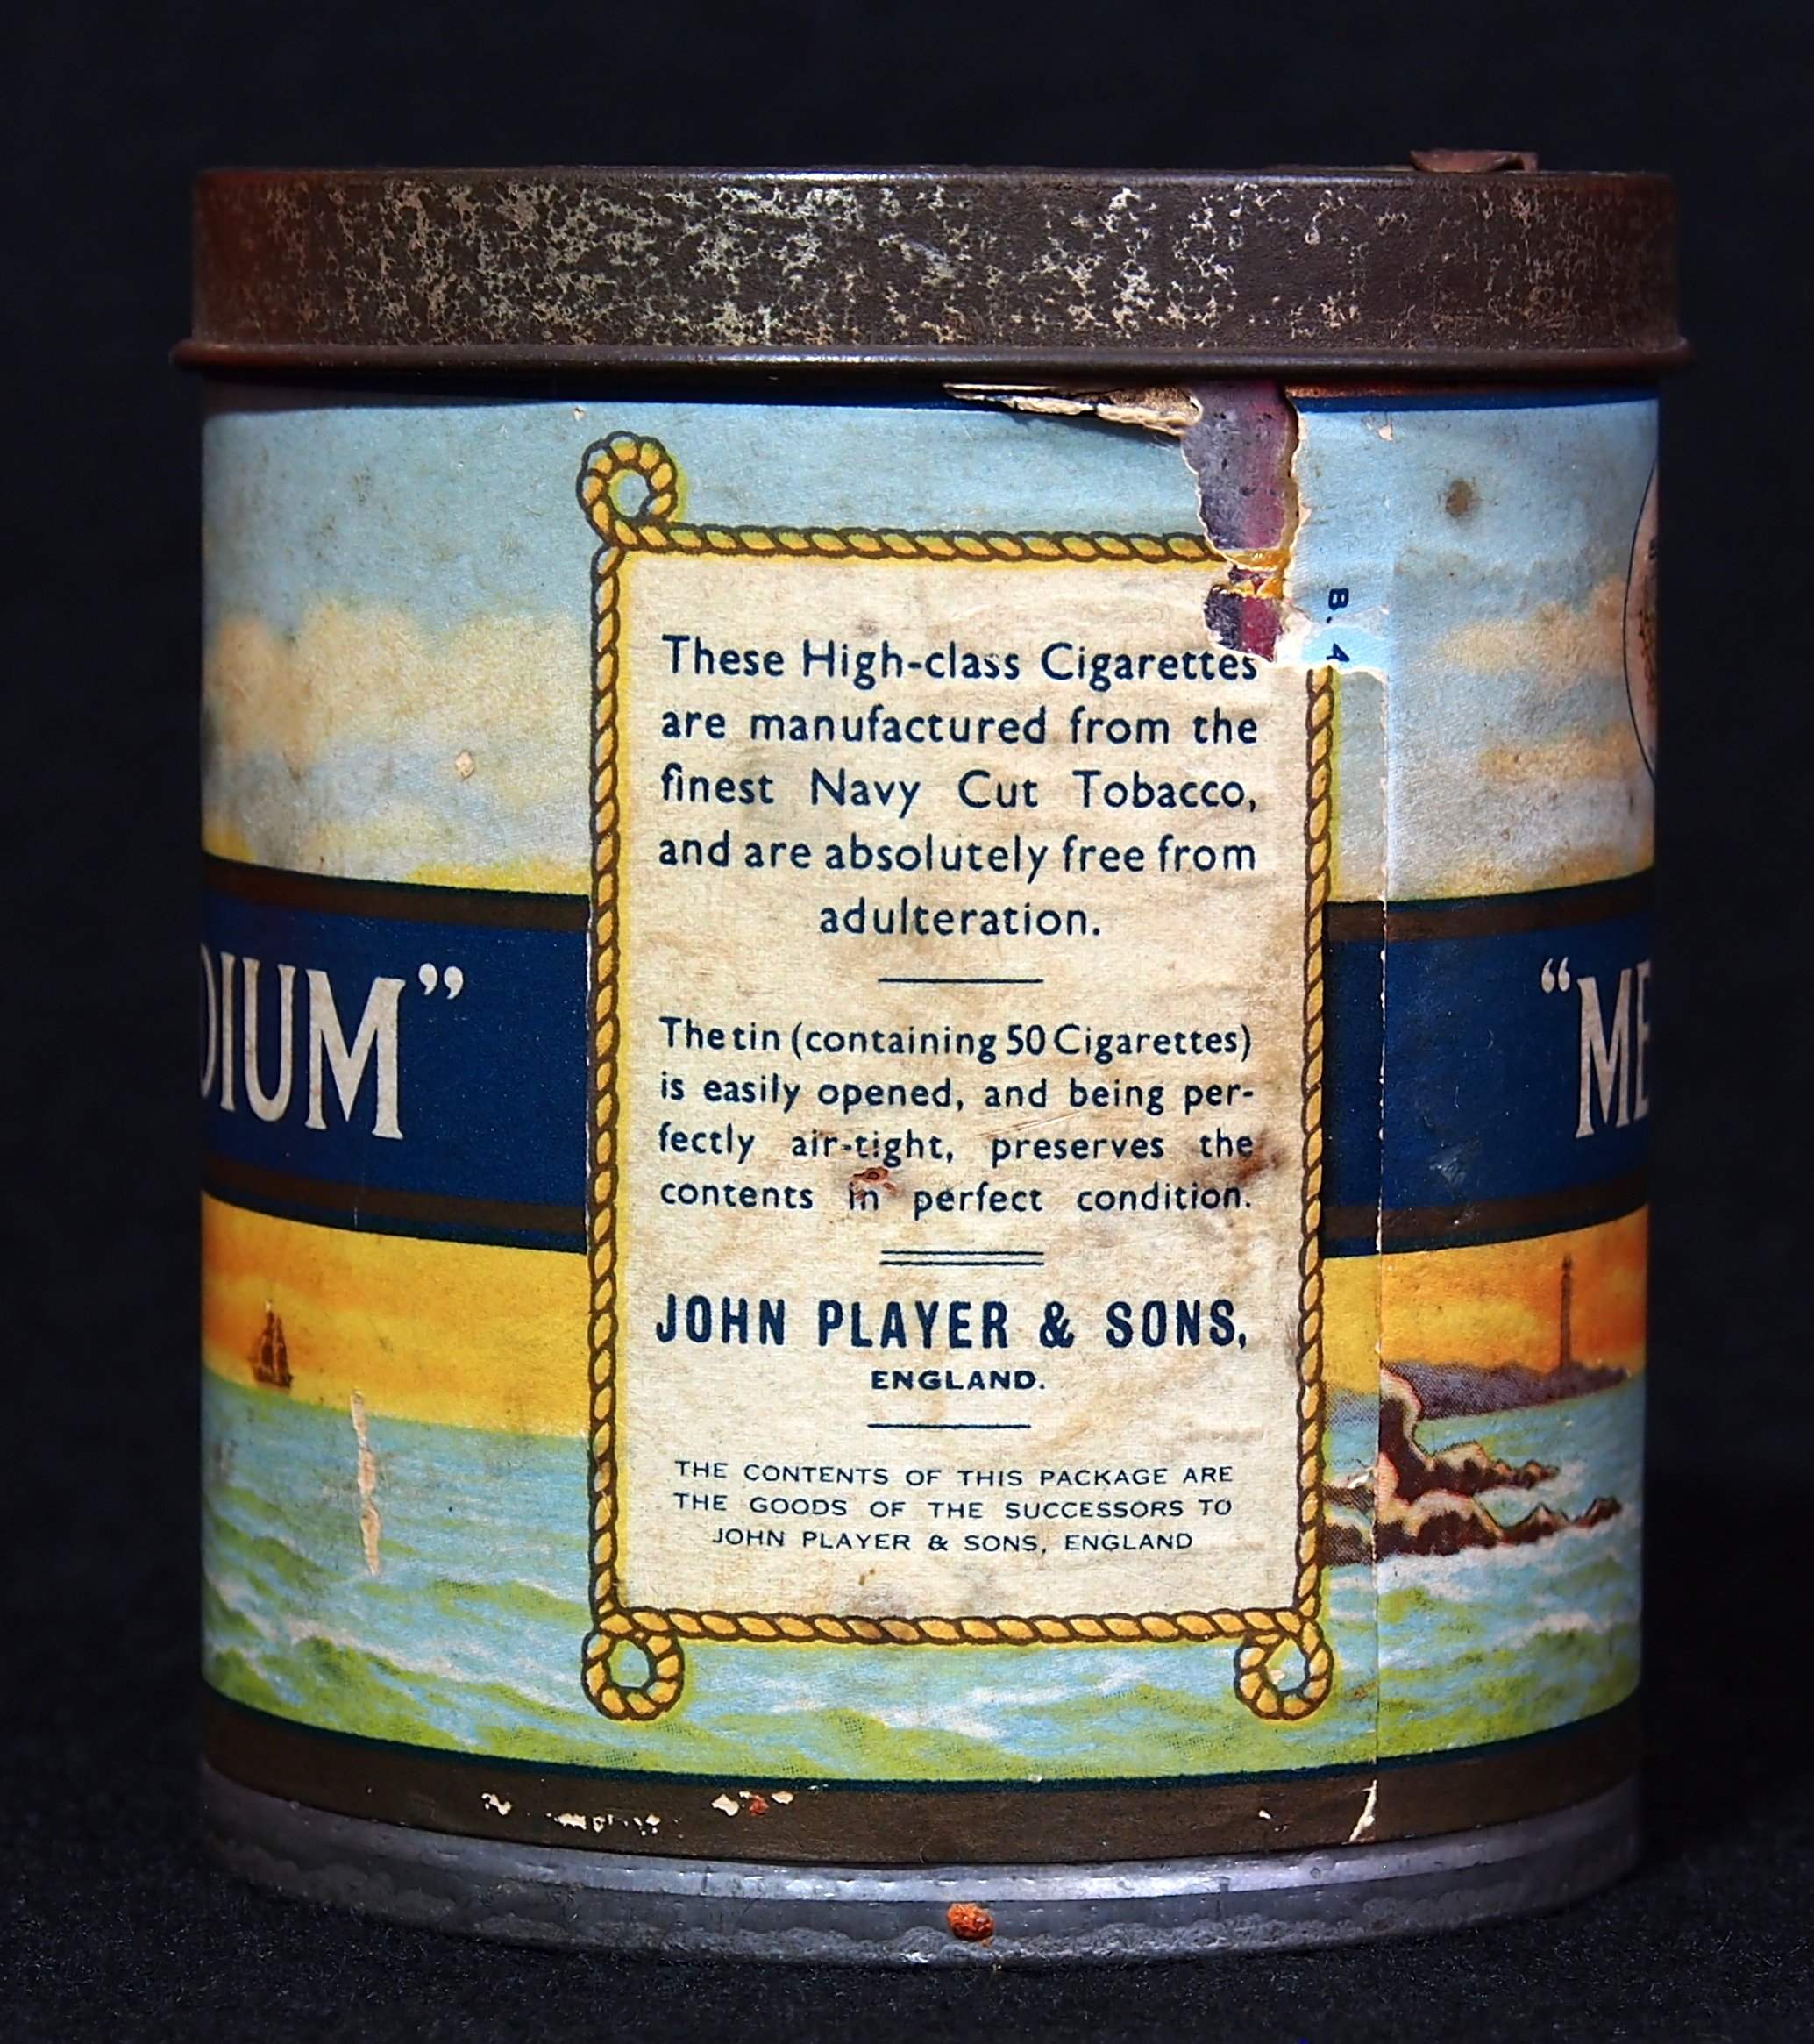 Cigarettes manufactured from Navy Cut Tobacco by John Player